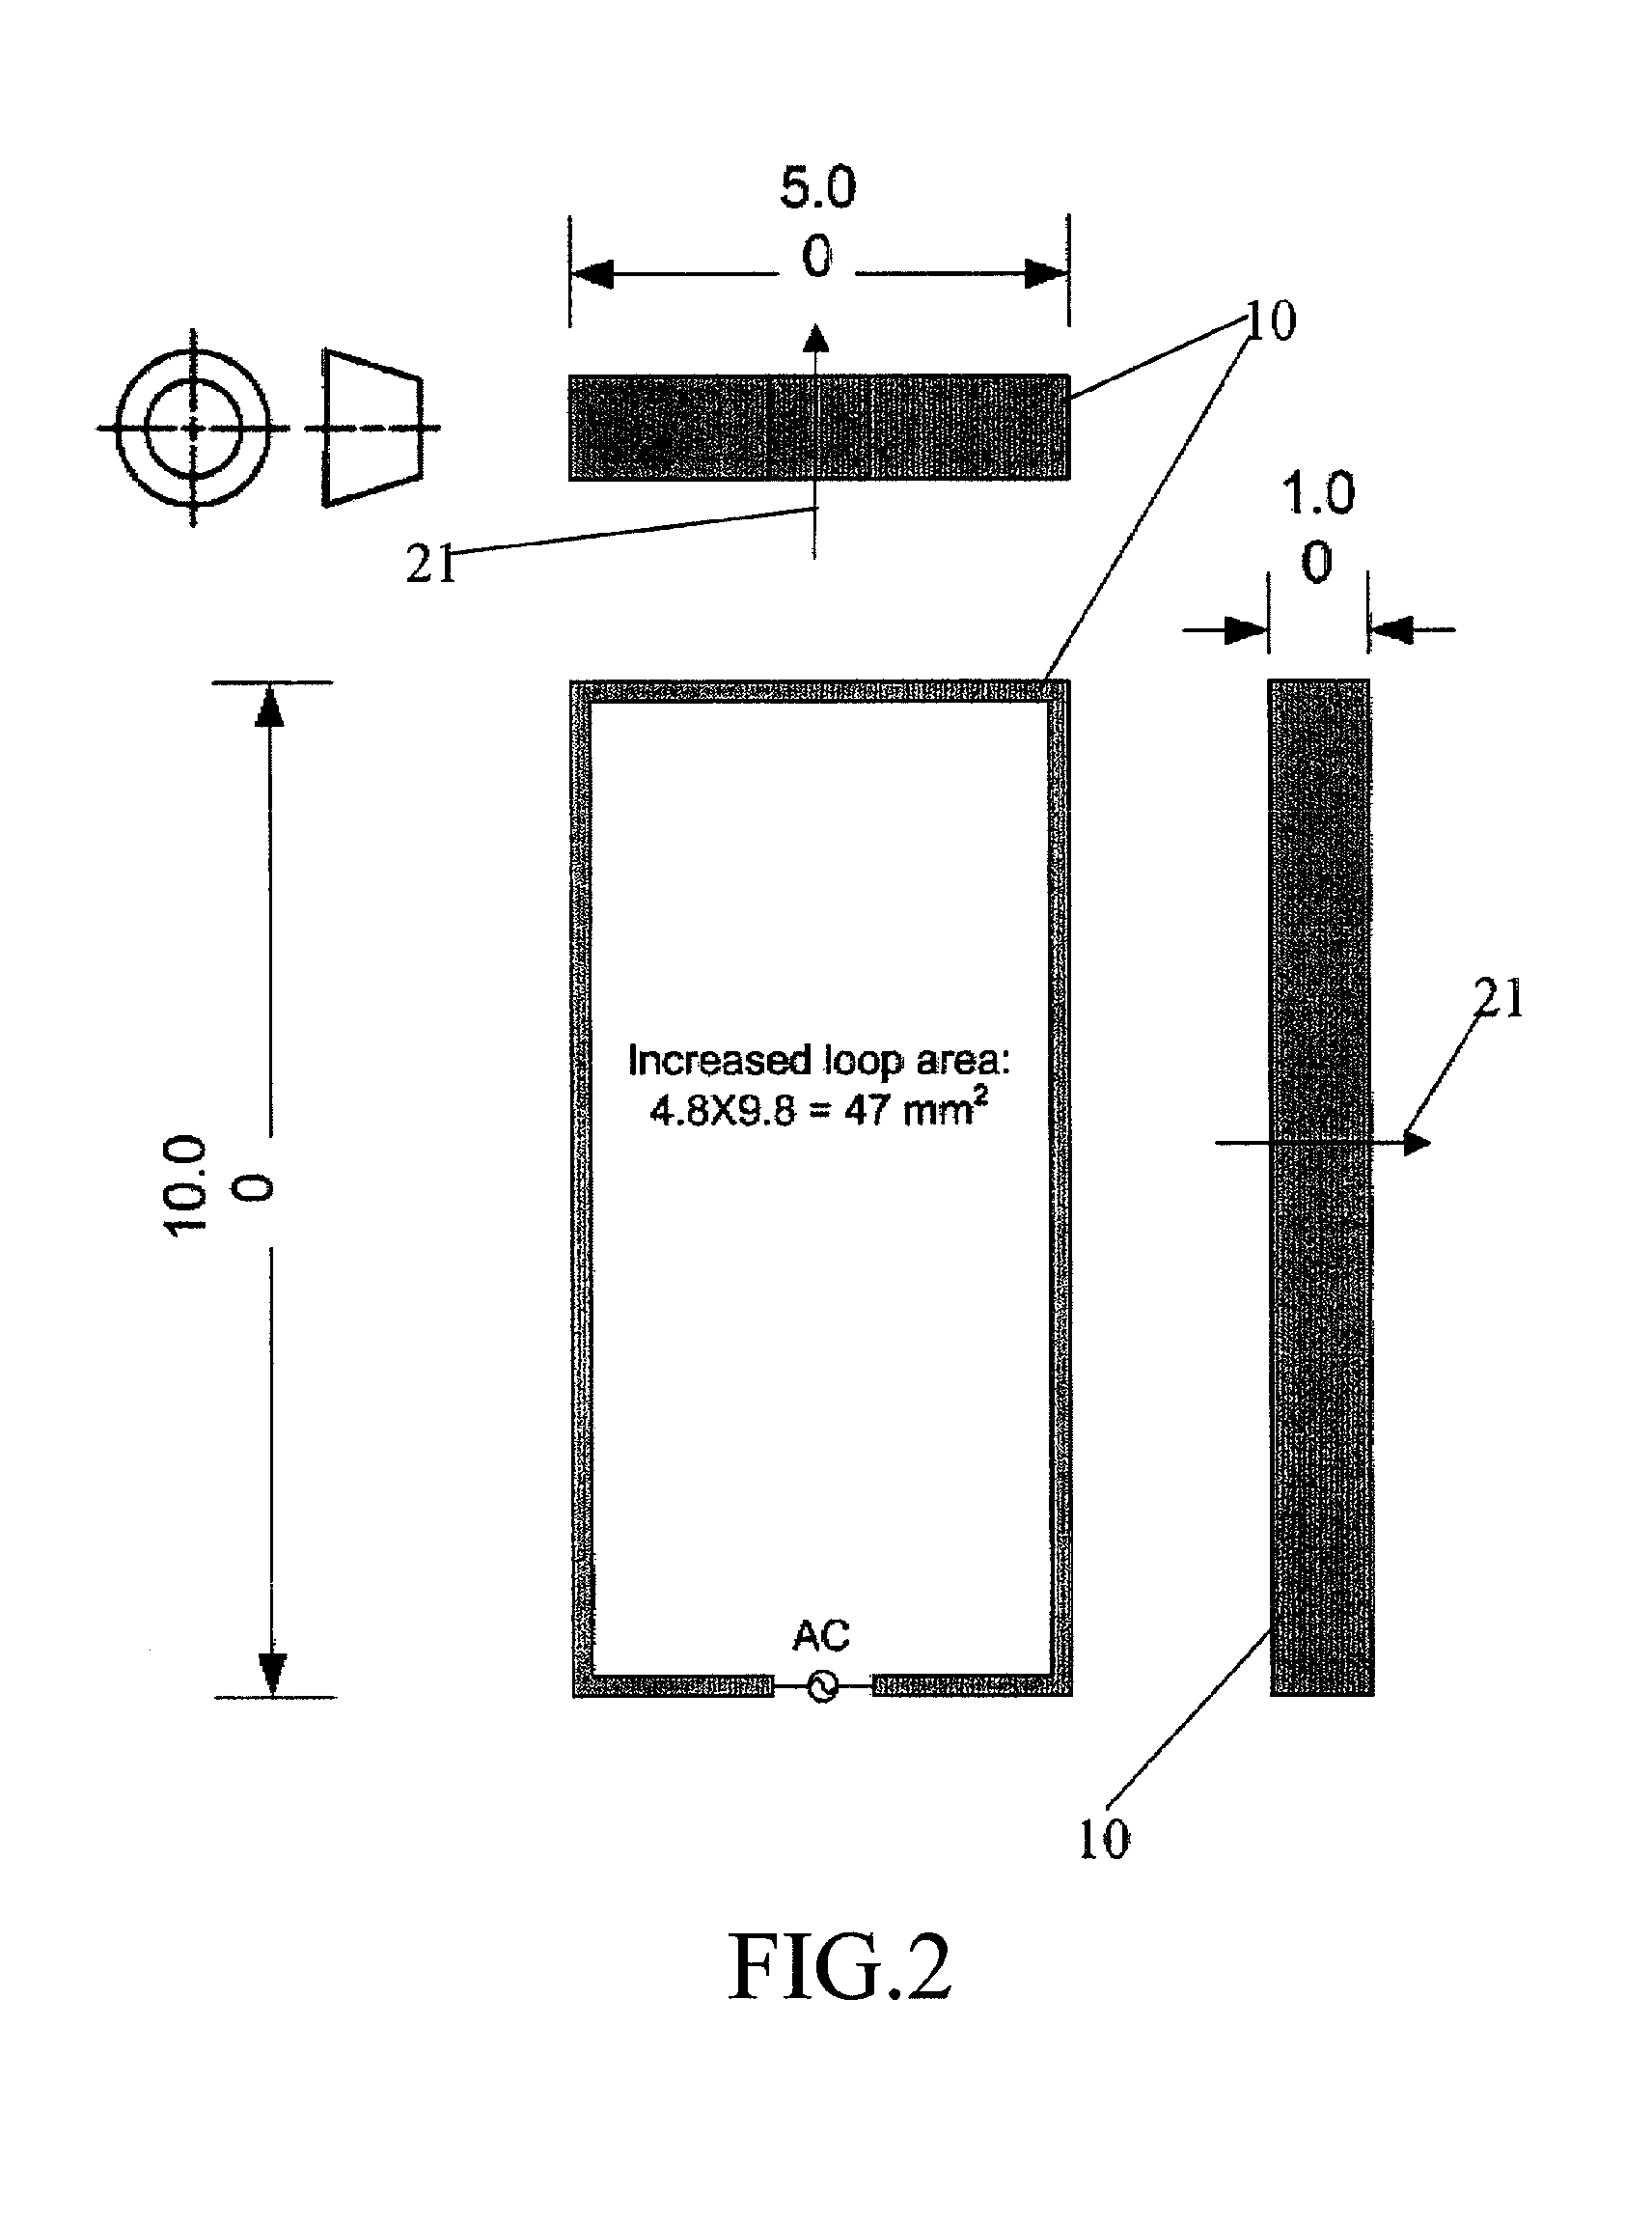 Loop antenna for in the ear audio device